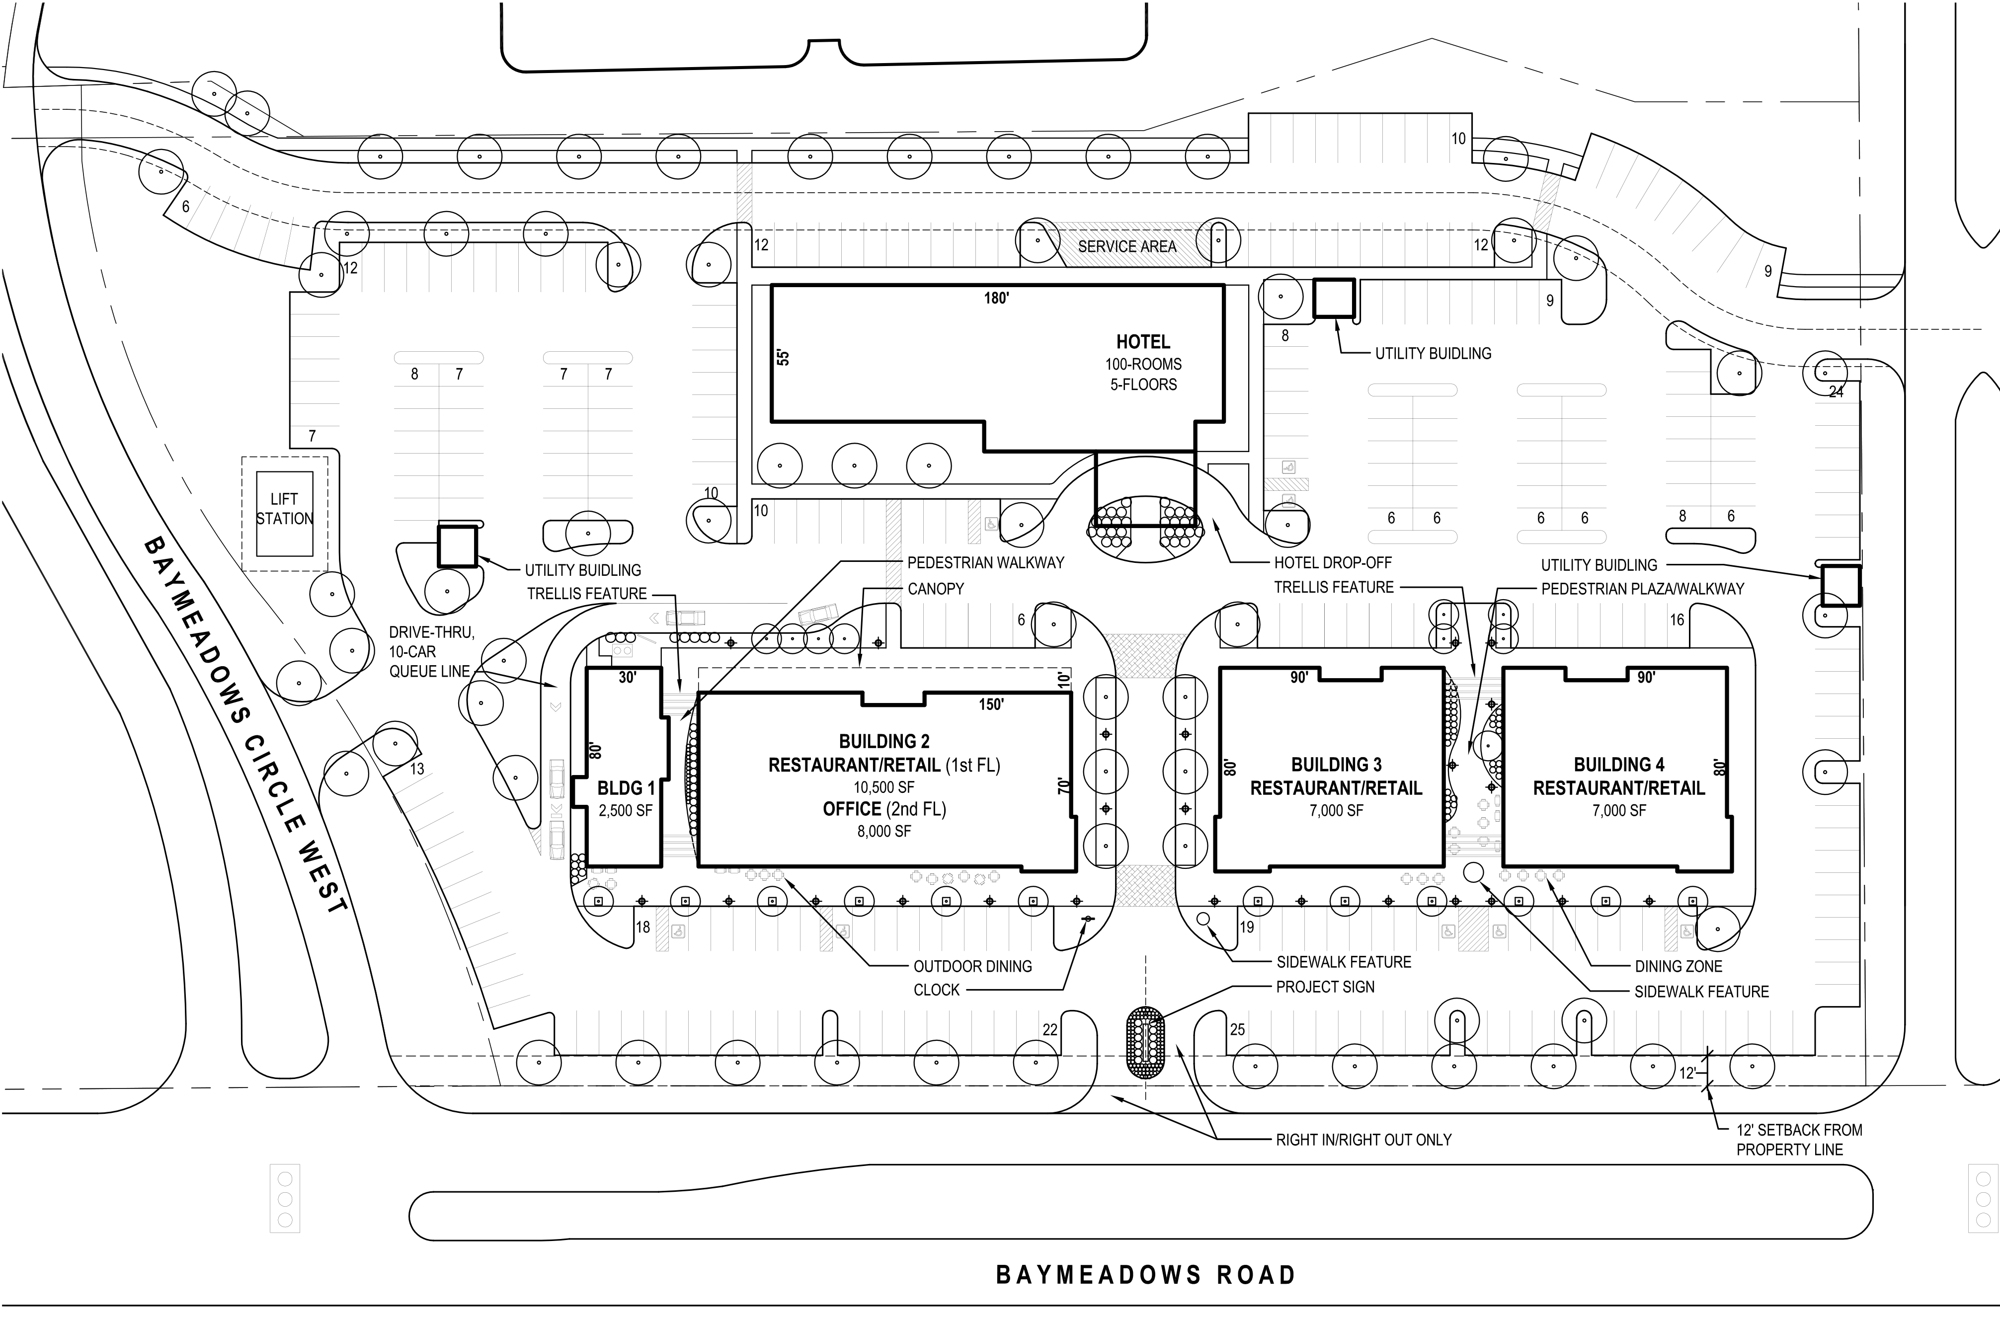 Site plan of the proposed mixed-use development at the former Baymeadows Golf Club.